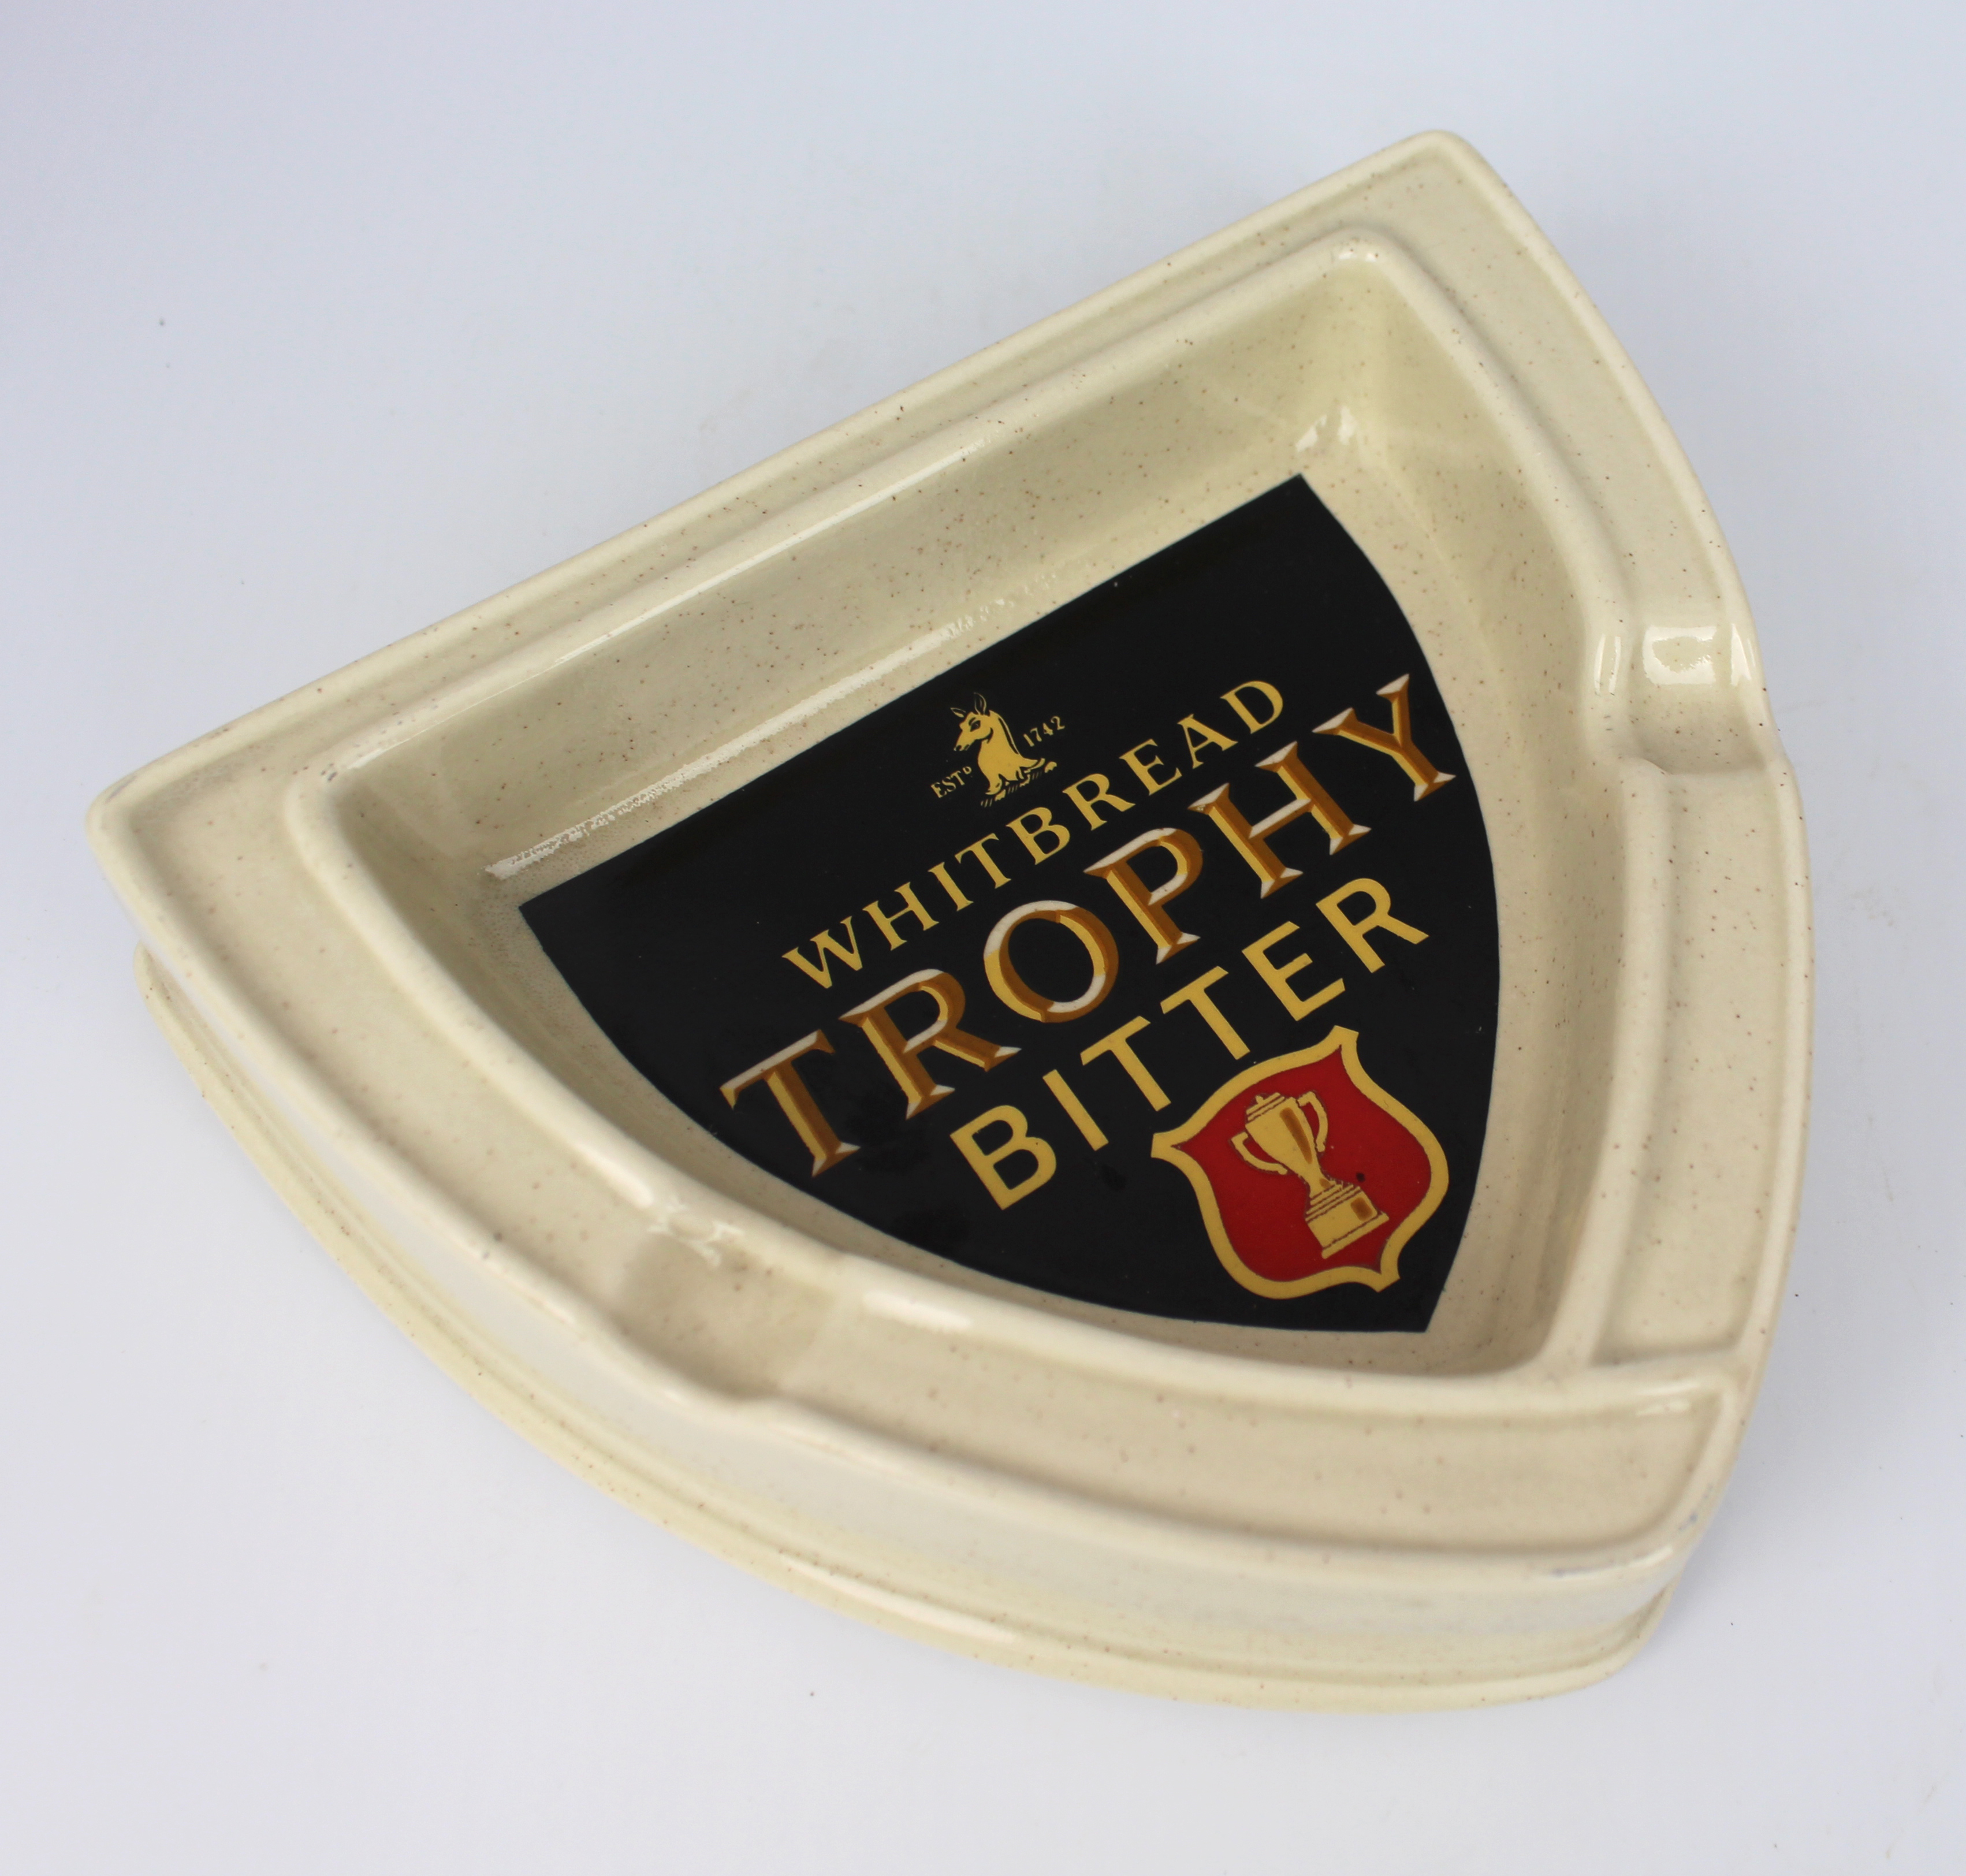 Whitbread Trophy Bitter Ashtray - Image 2 of 2